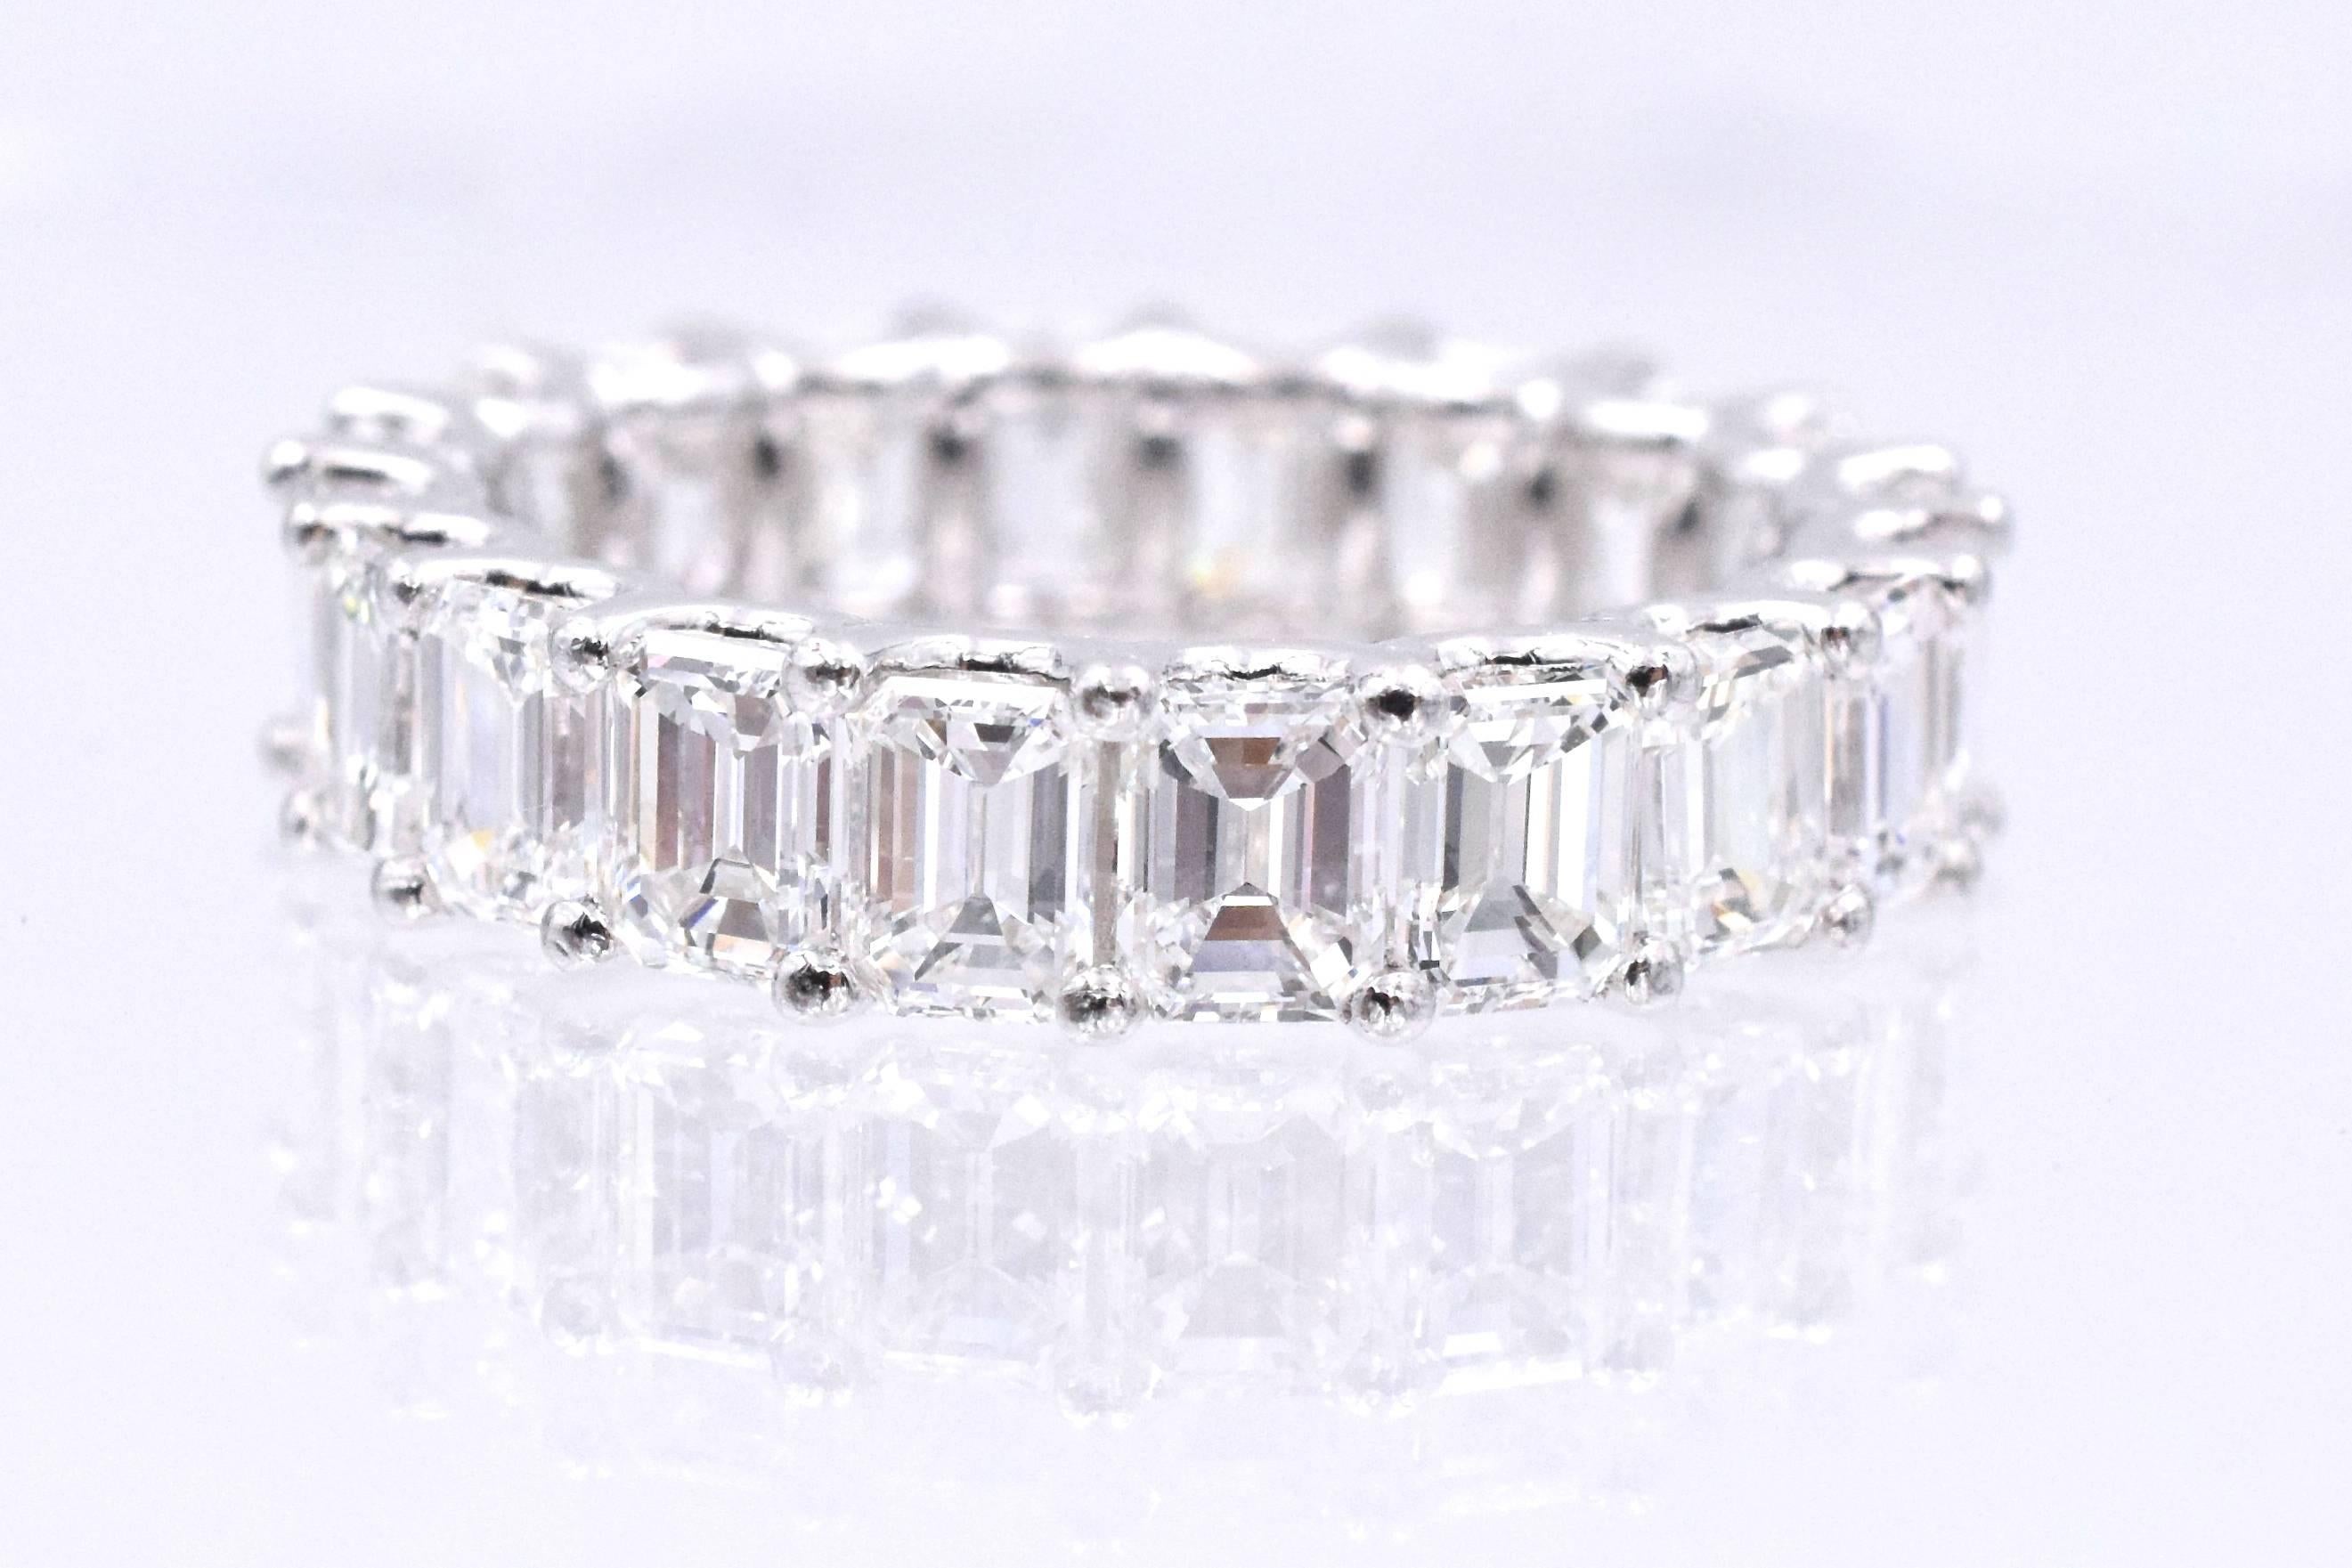 Elegant eternity band with  20 emerald shape diamonds set in platinum with common prong style and U shape shape gellery. Total weight of the diamonds is 5.40 carats and each diamond is 0.27 carat. The diamonds are F color,VS clarity
Ring size: